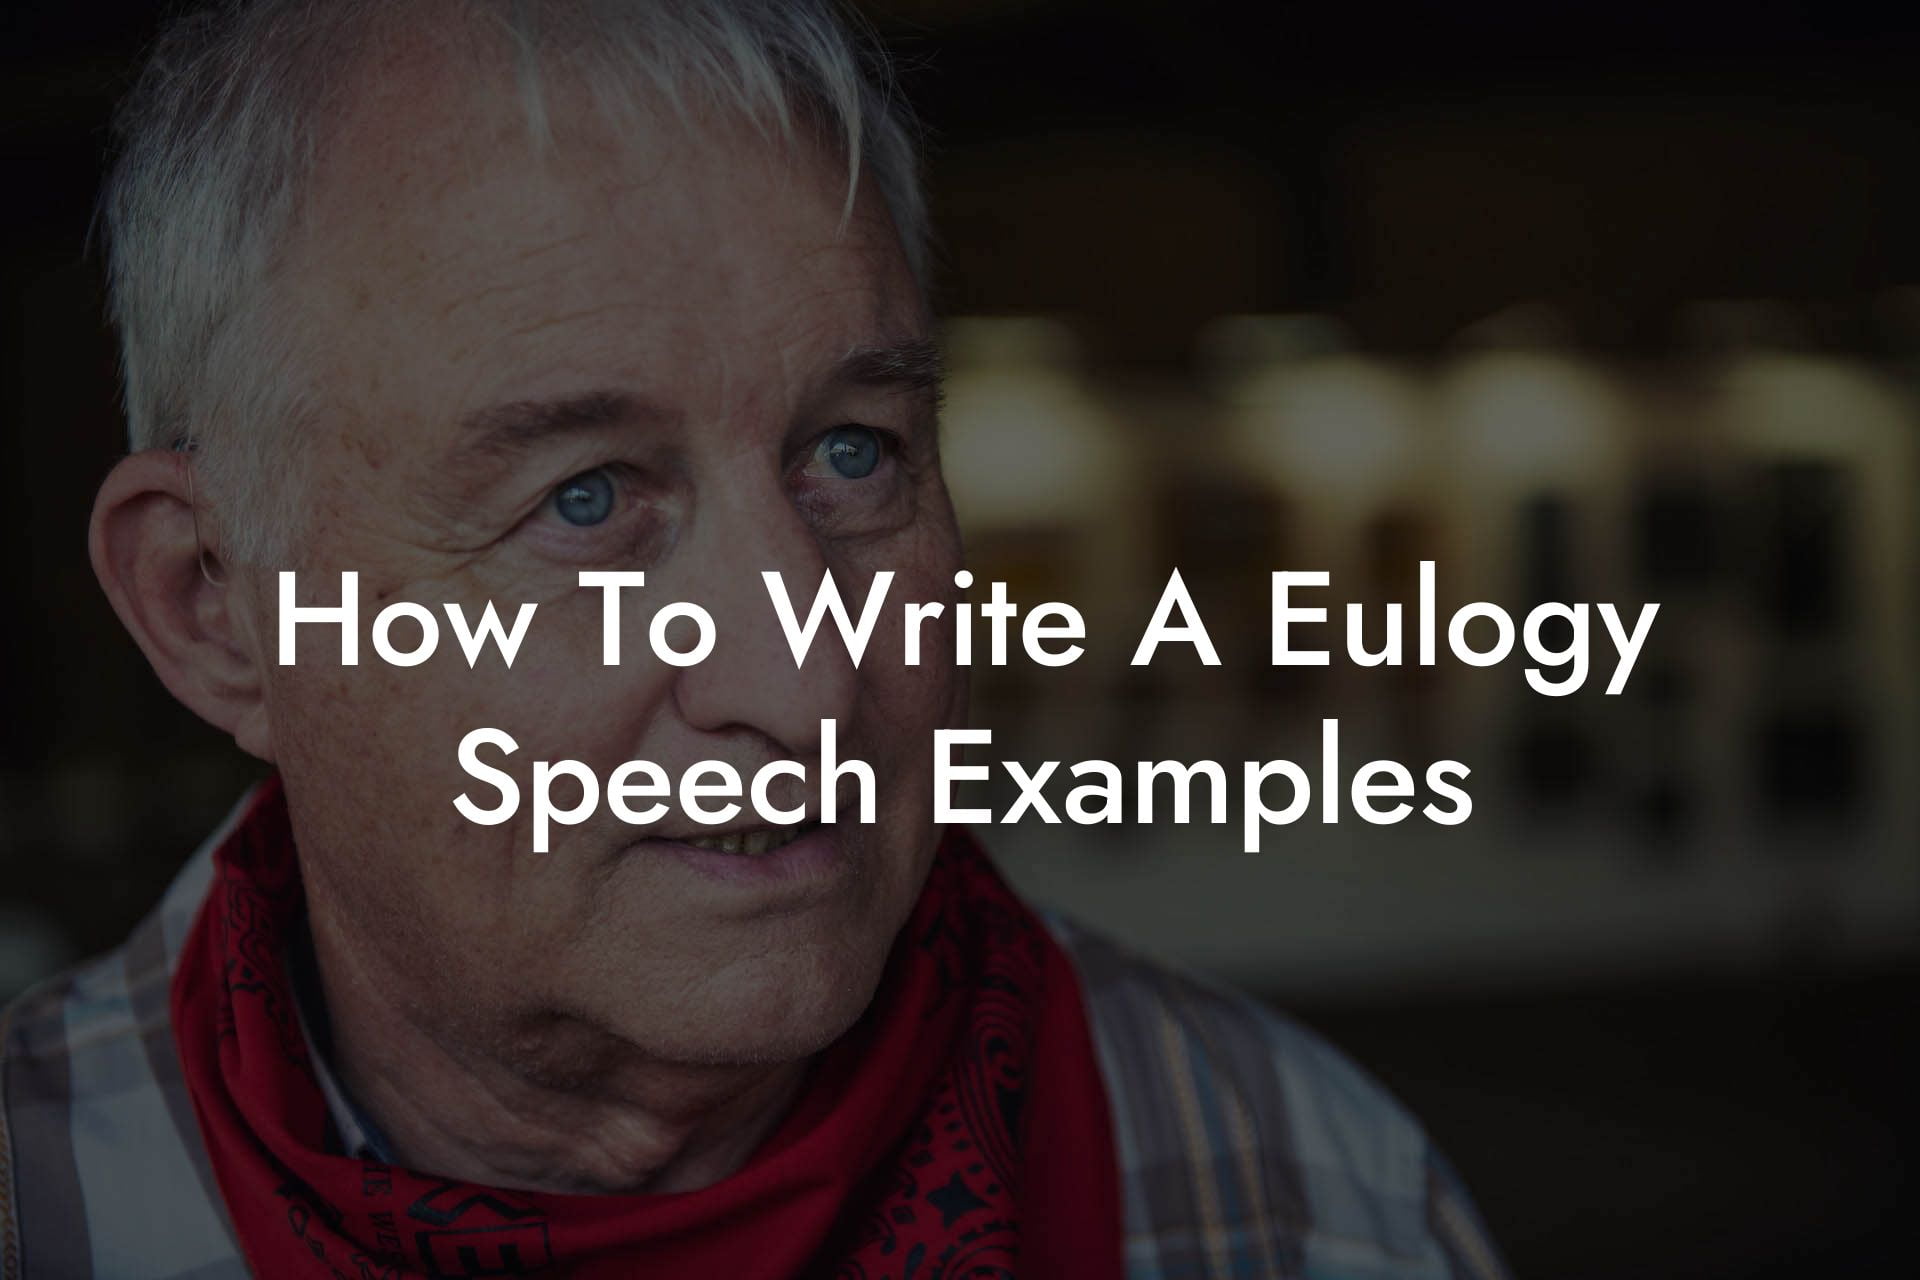 How To Write A Eulogy Speech Examples